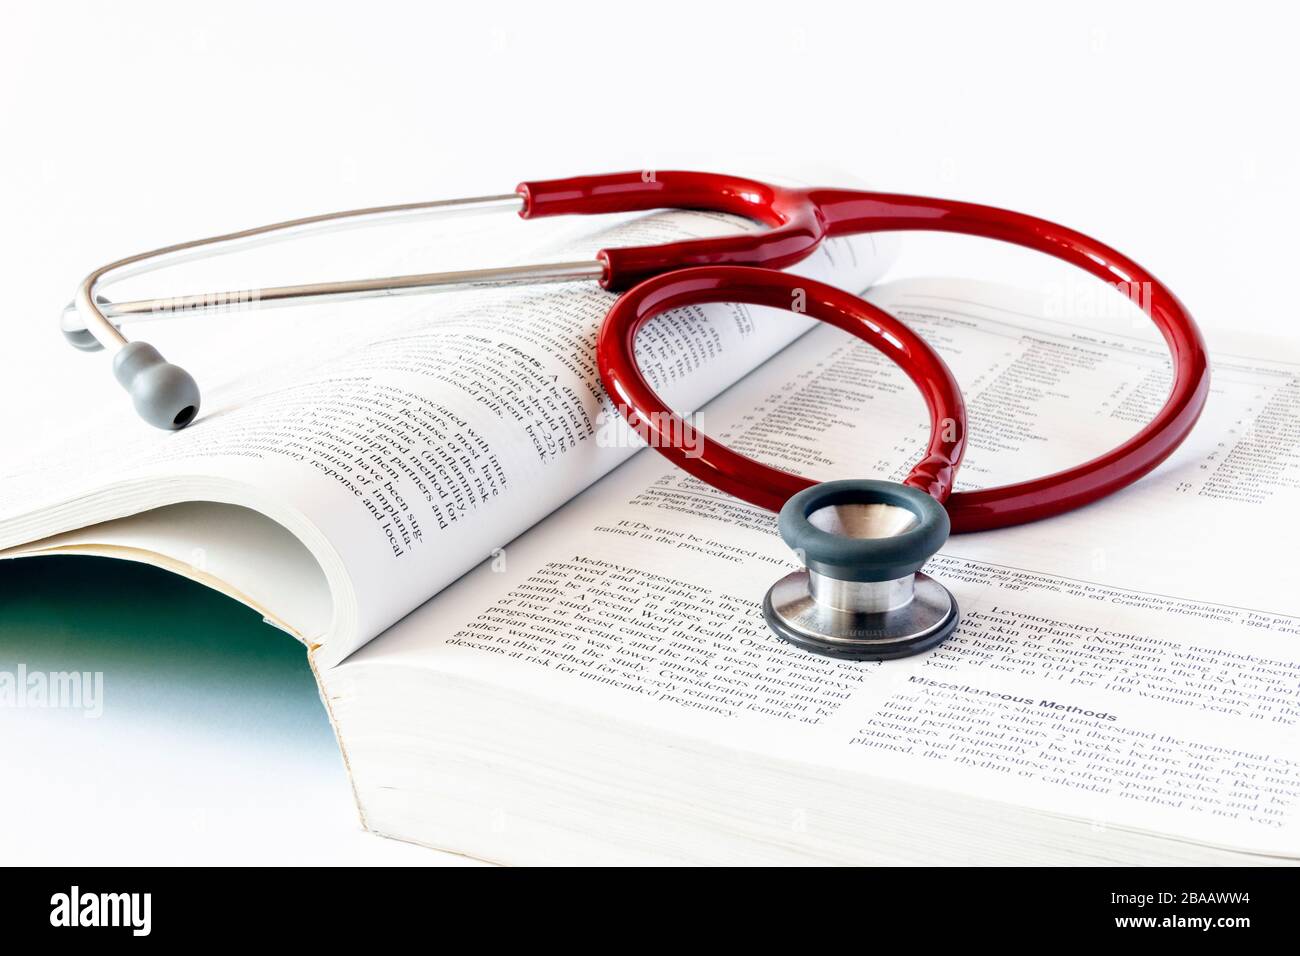 A red stethoscope on an open medical textbook Stock Photo